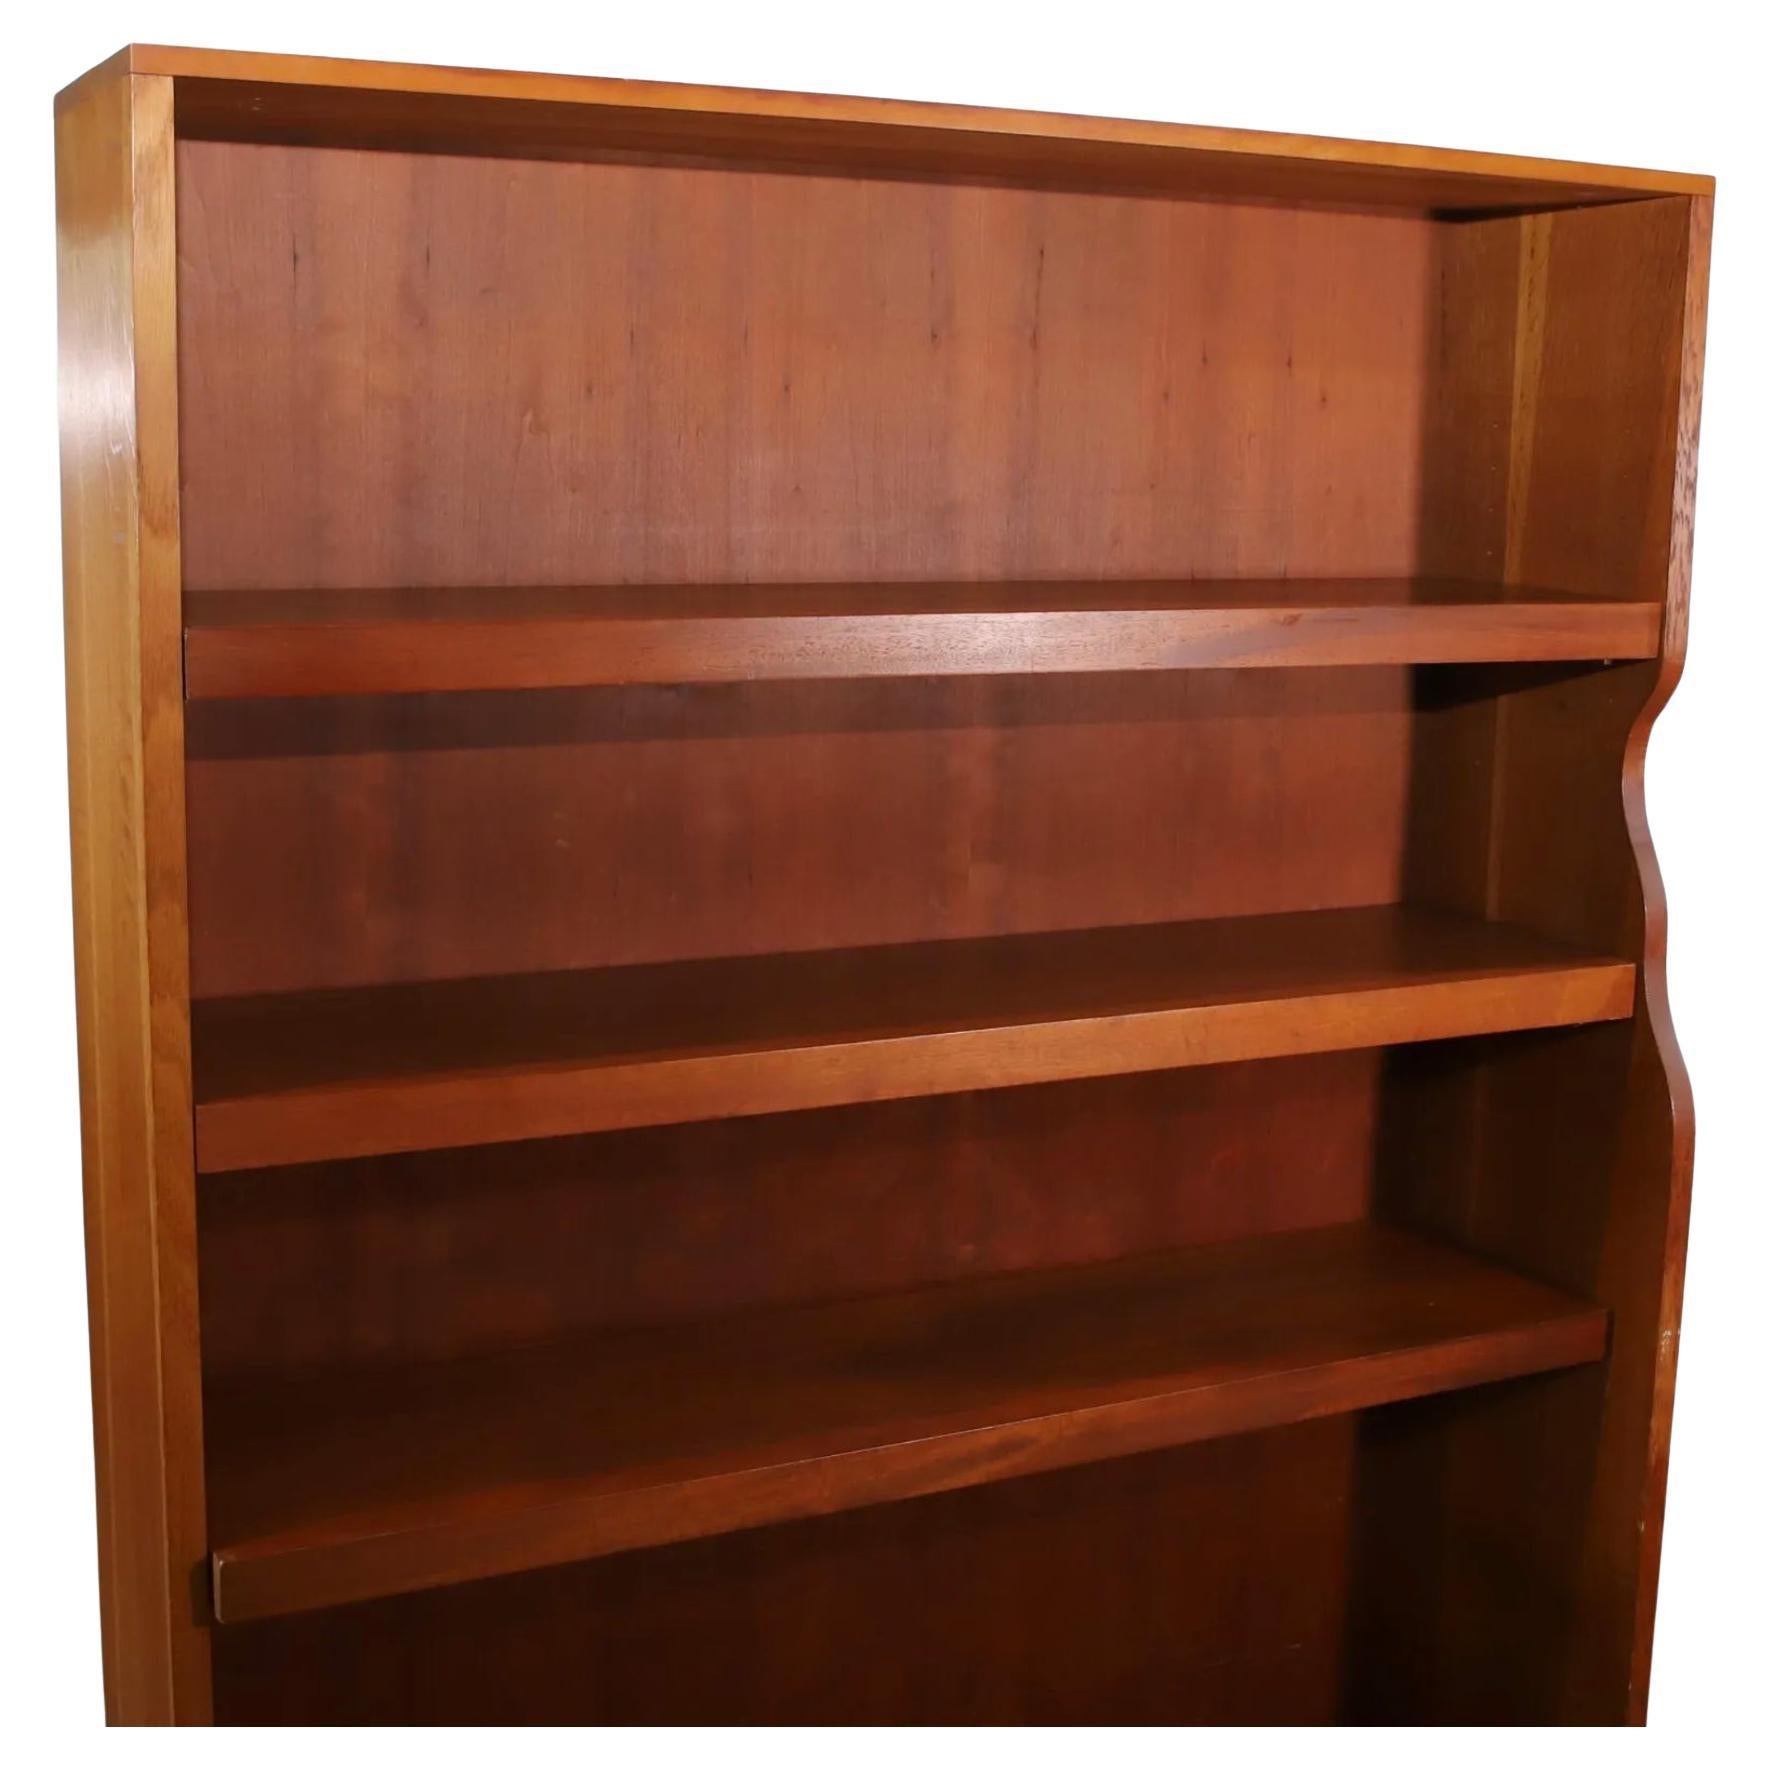 Unique Vintage Mid-Century Modern American Studio Craft Oak and cherry Bookcase. Beautiful bookcase custom made Bookcase Shelf unit with freeform sculptural shaped side and (3) adjustable shelves with copper supports with the lower shelf also with